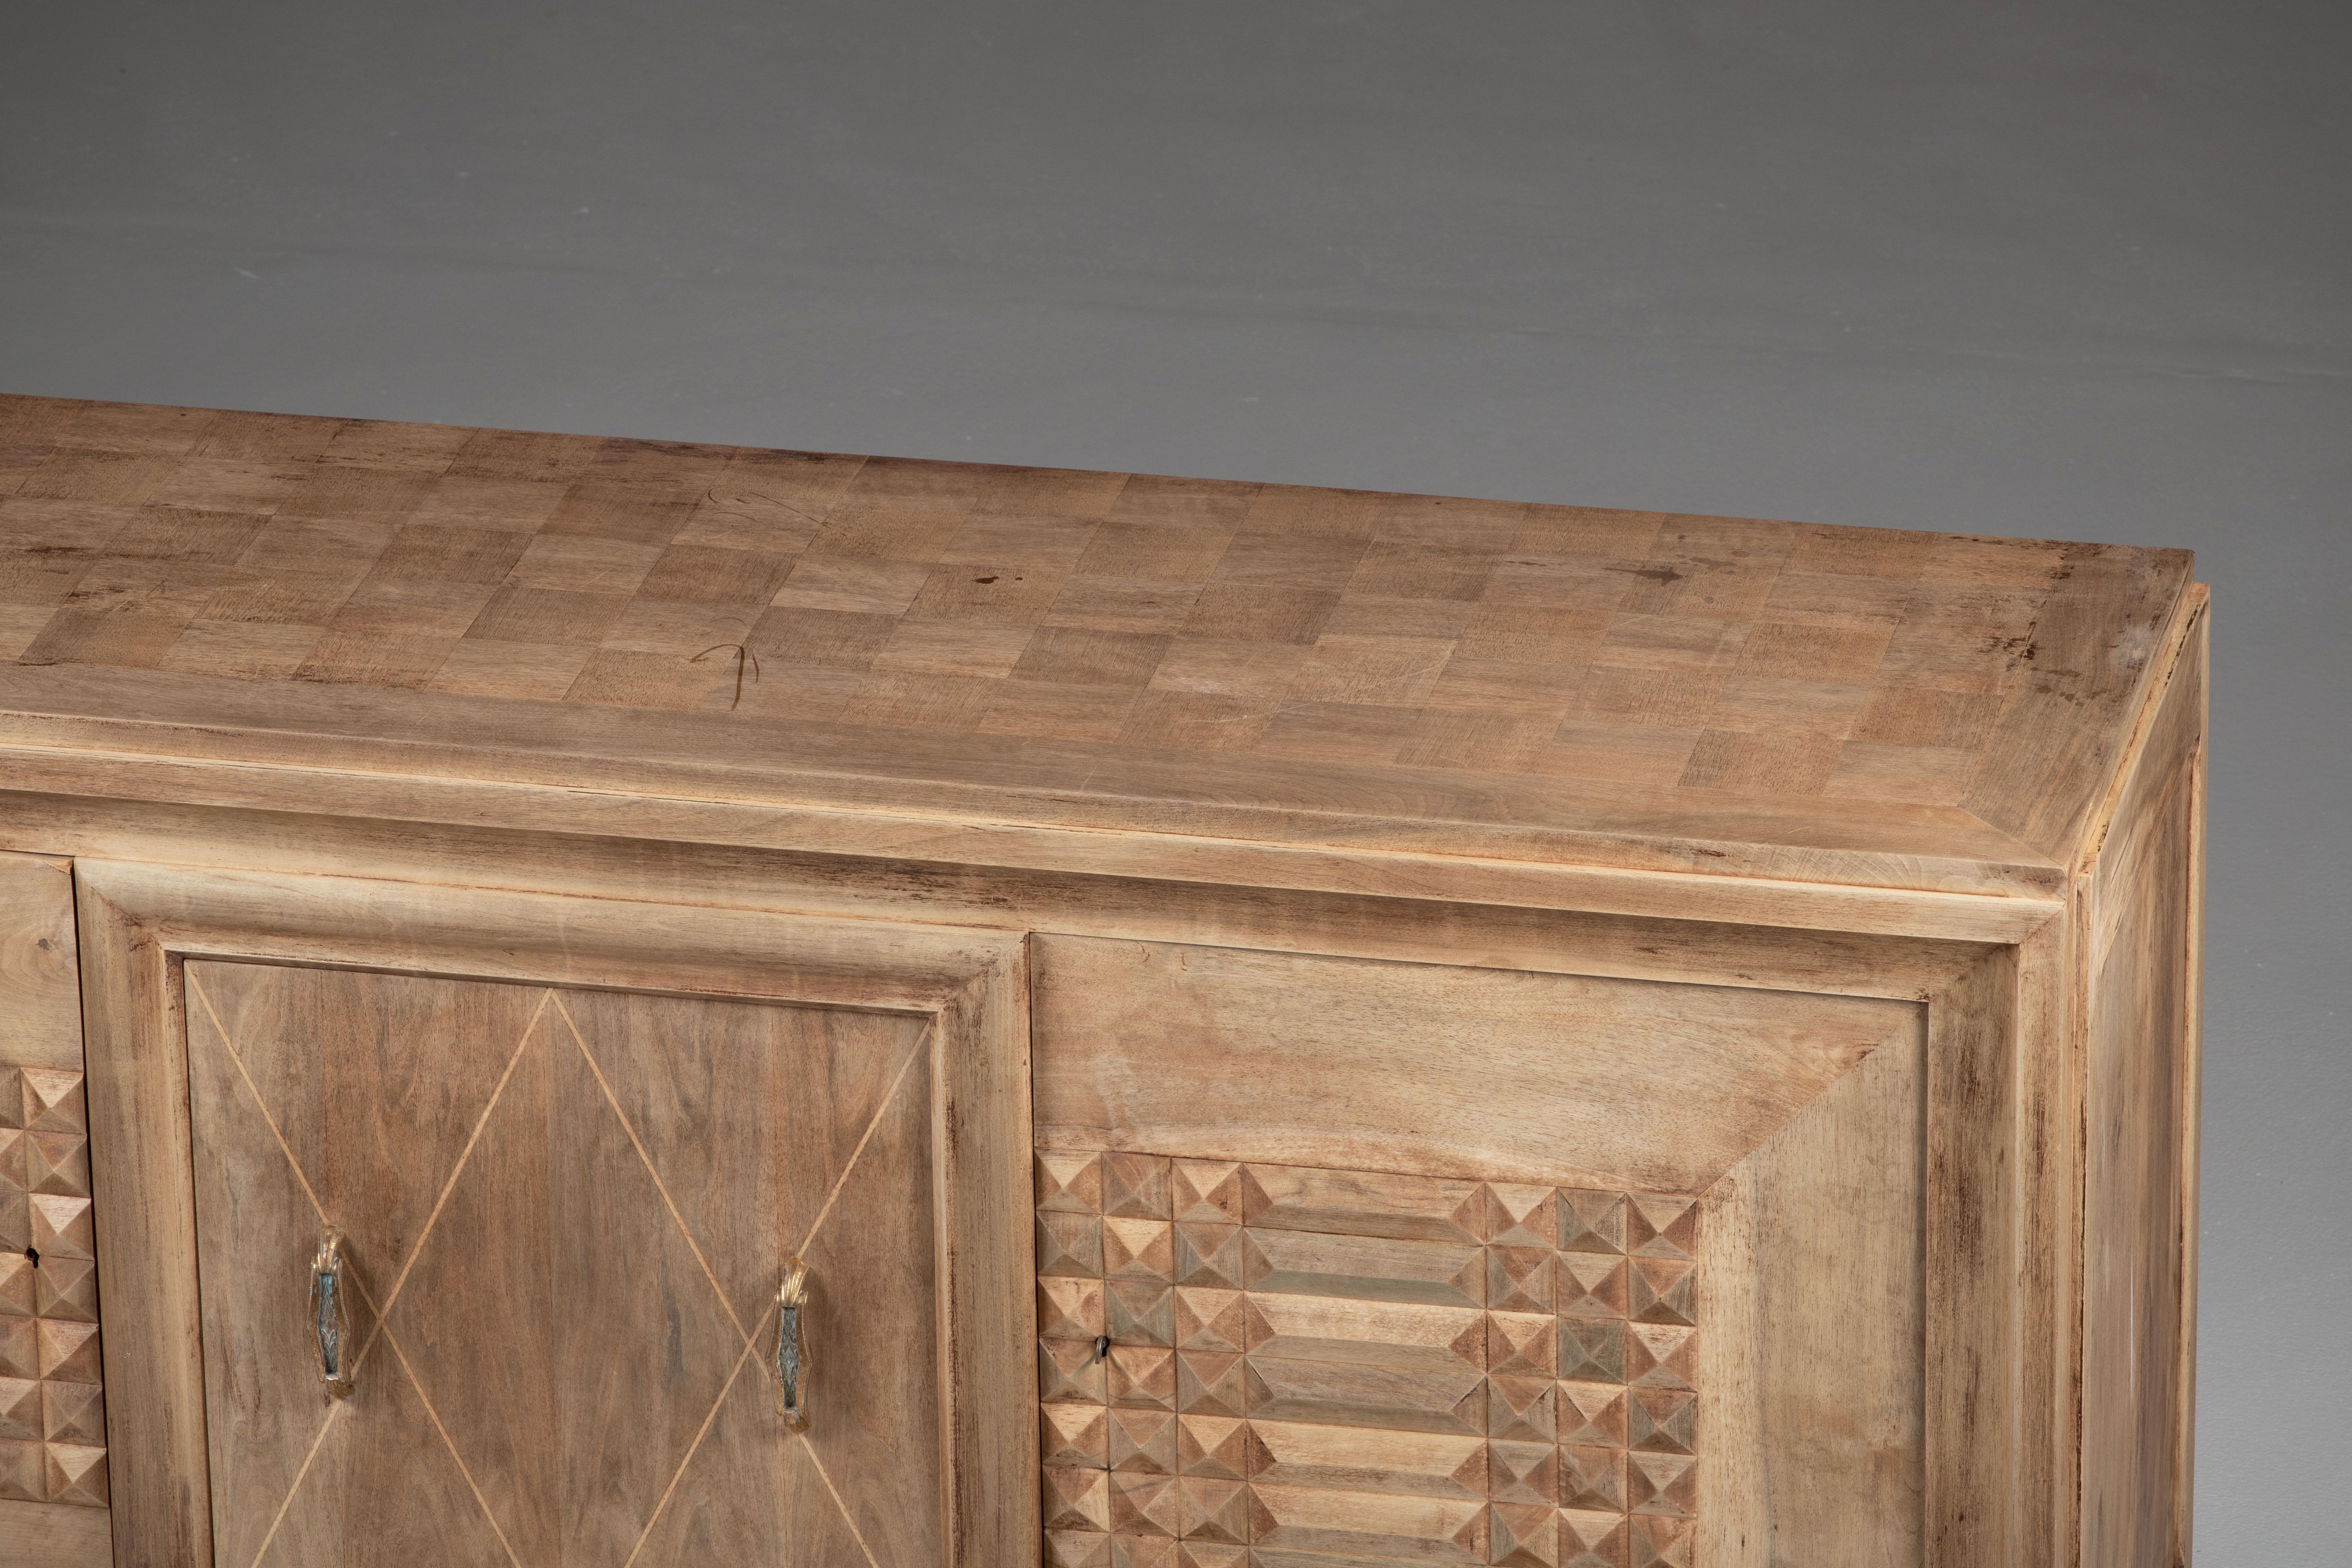 Bleached Art Deco Solid Oak Sideboard with Geometric Details, France, 1940s For Sale 10